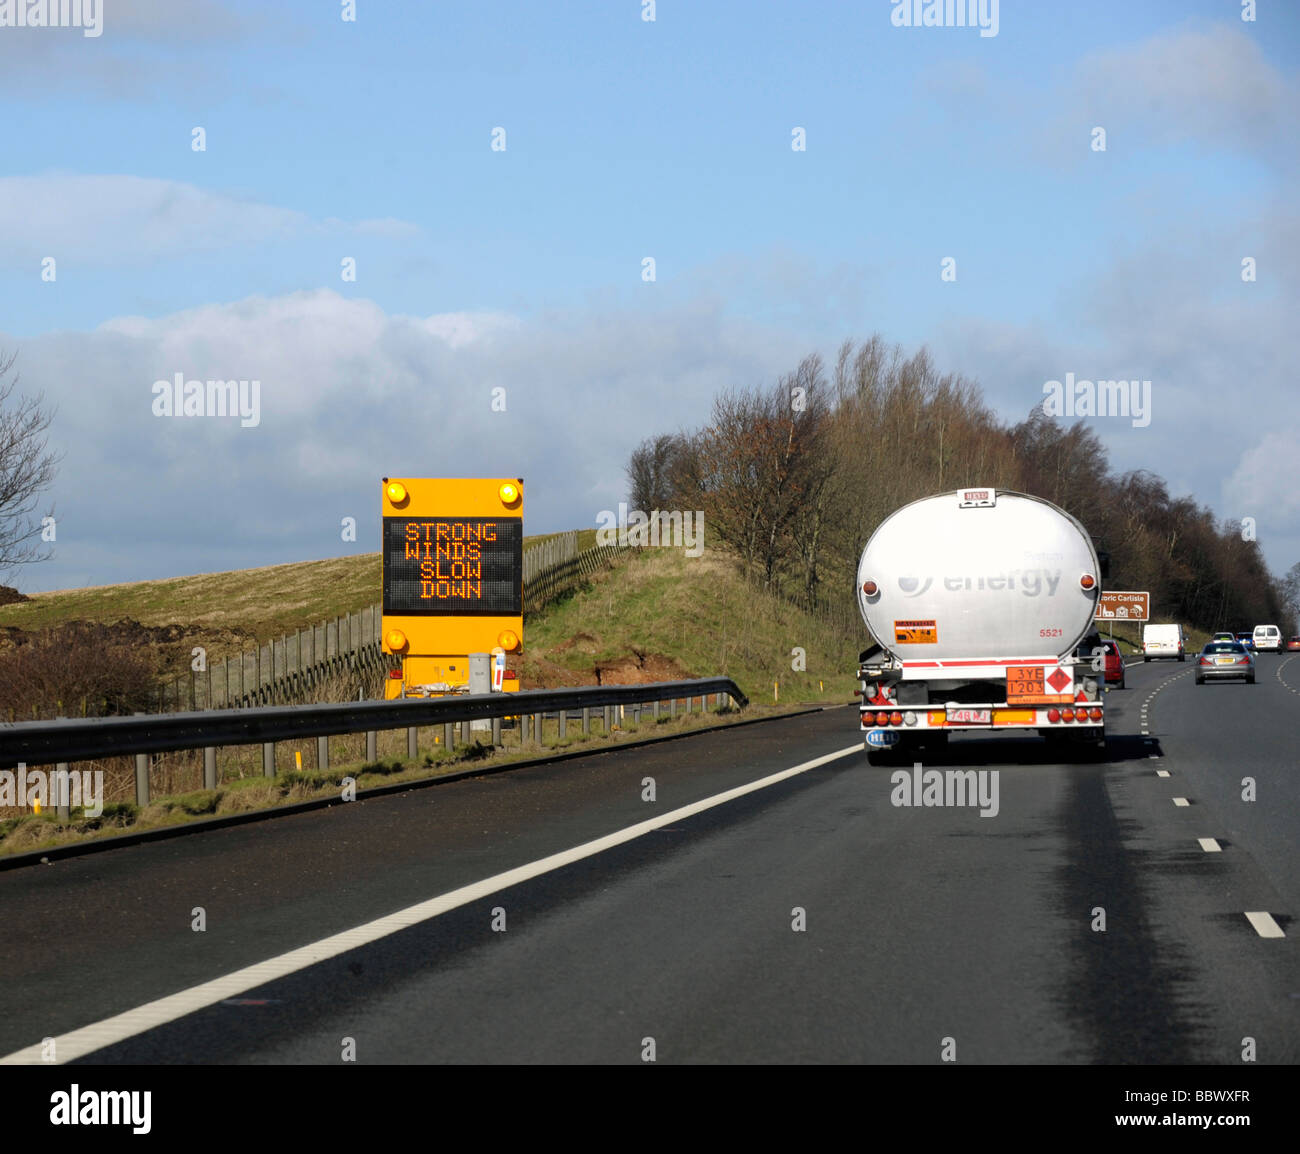 Warning matrix slow down strong winds on motorway as LGV large goods vehicle HGV fuel petrol tanker passes Stock Photo